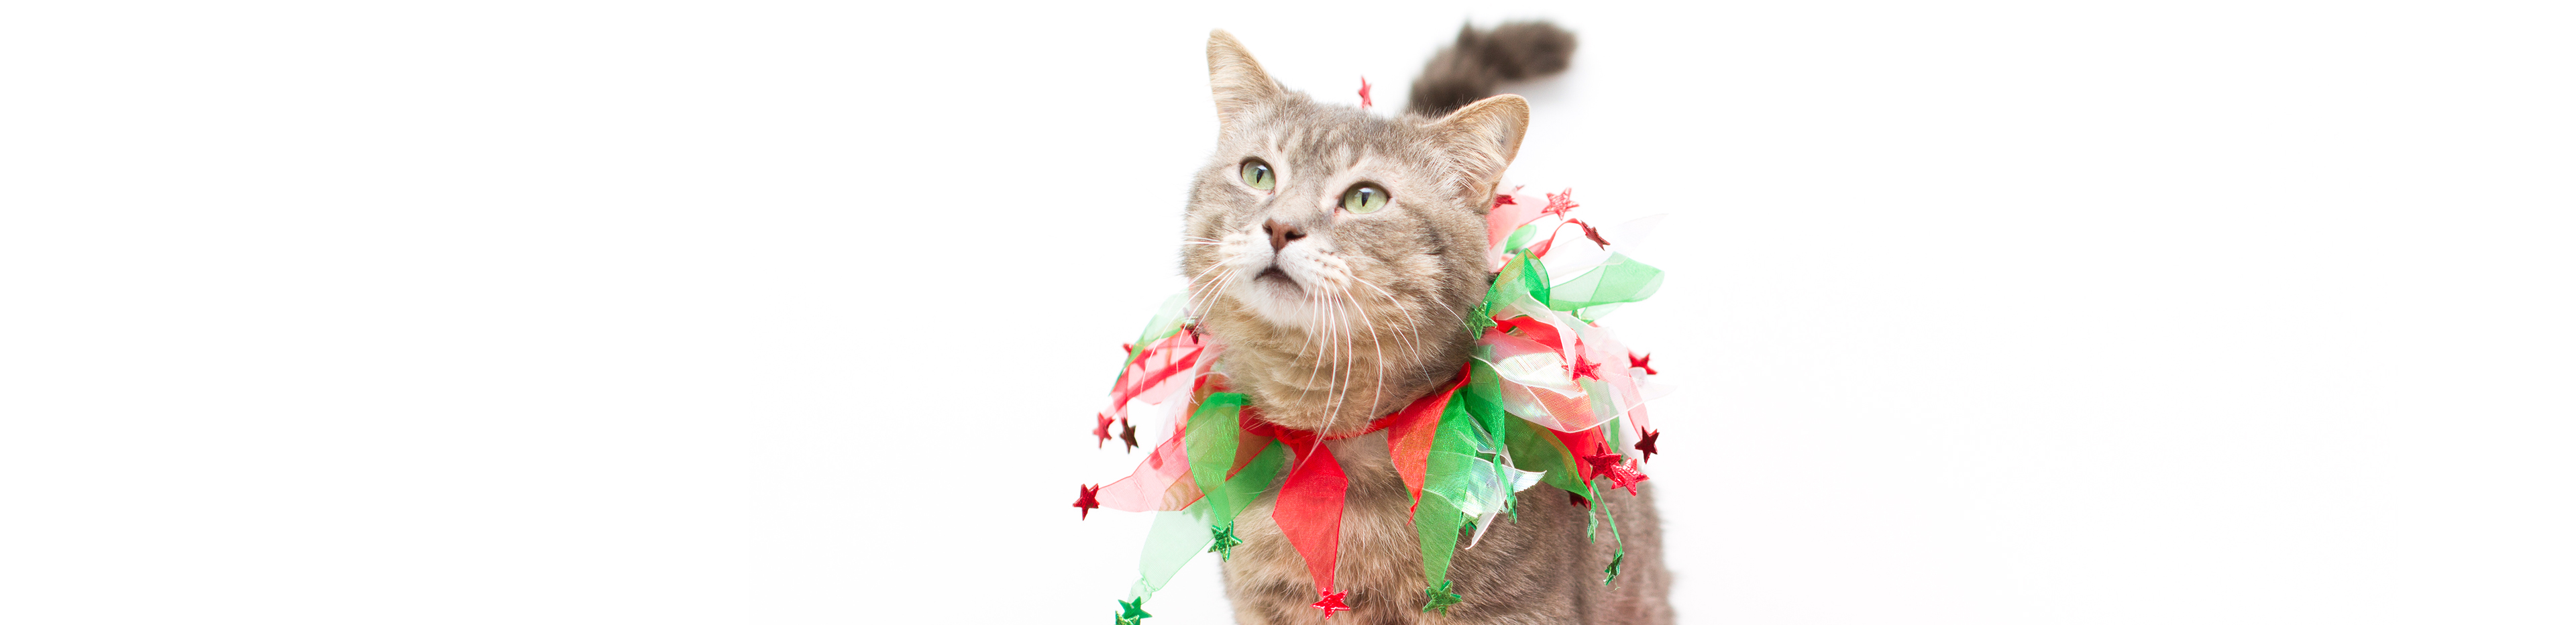 Cat with a christmas decorated collar promotes buying Christmas presents for pets blog